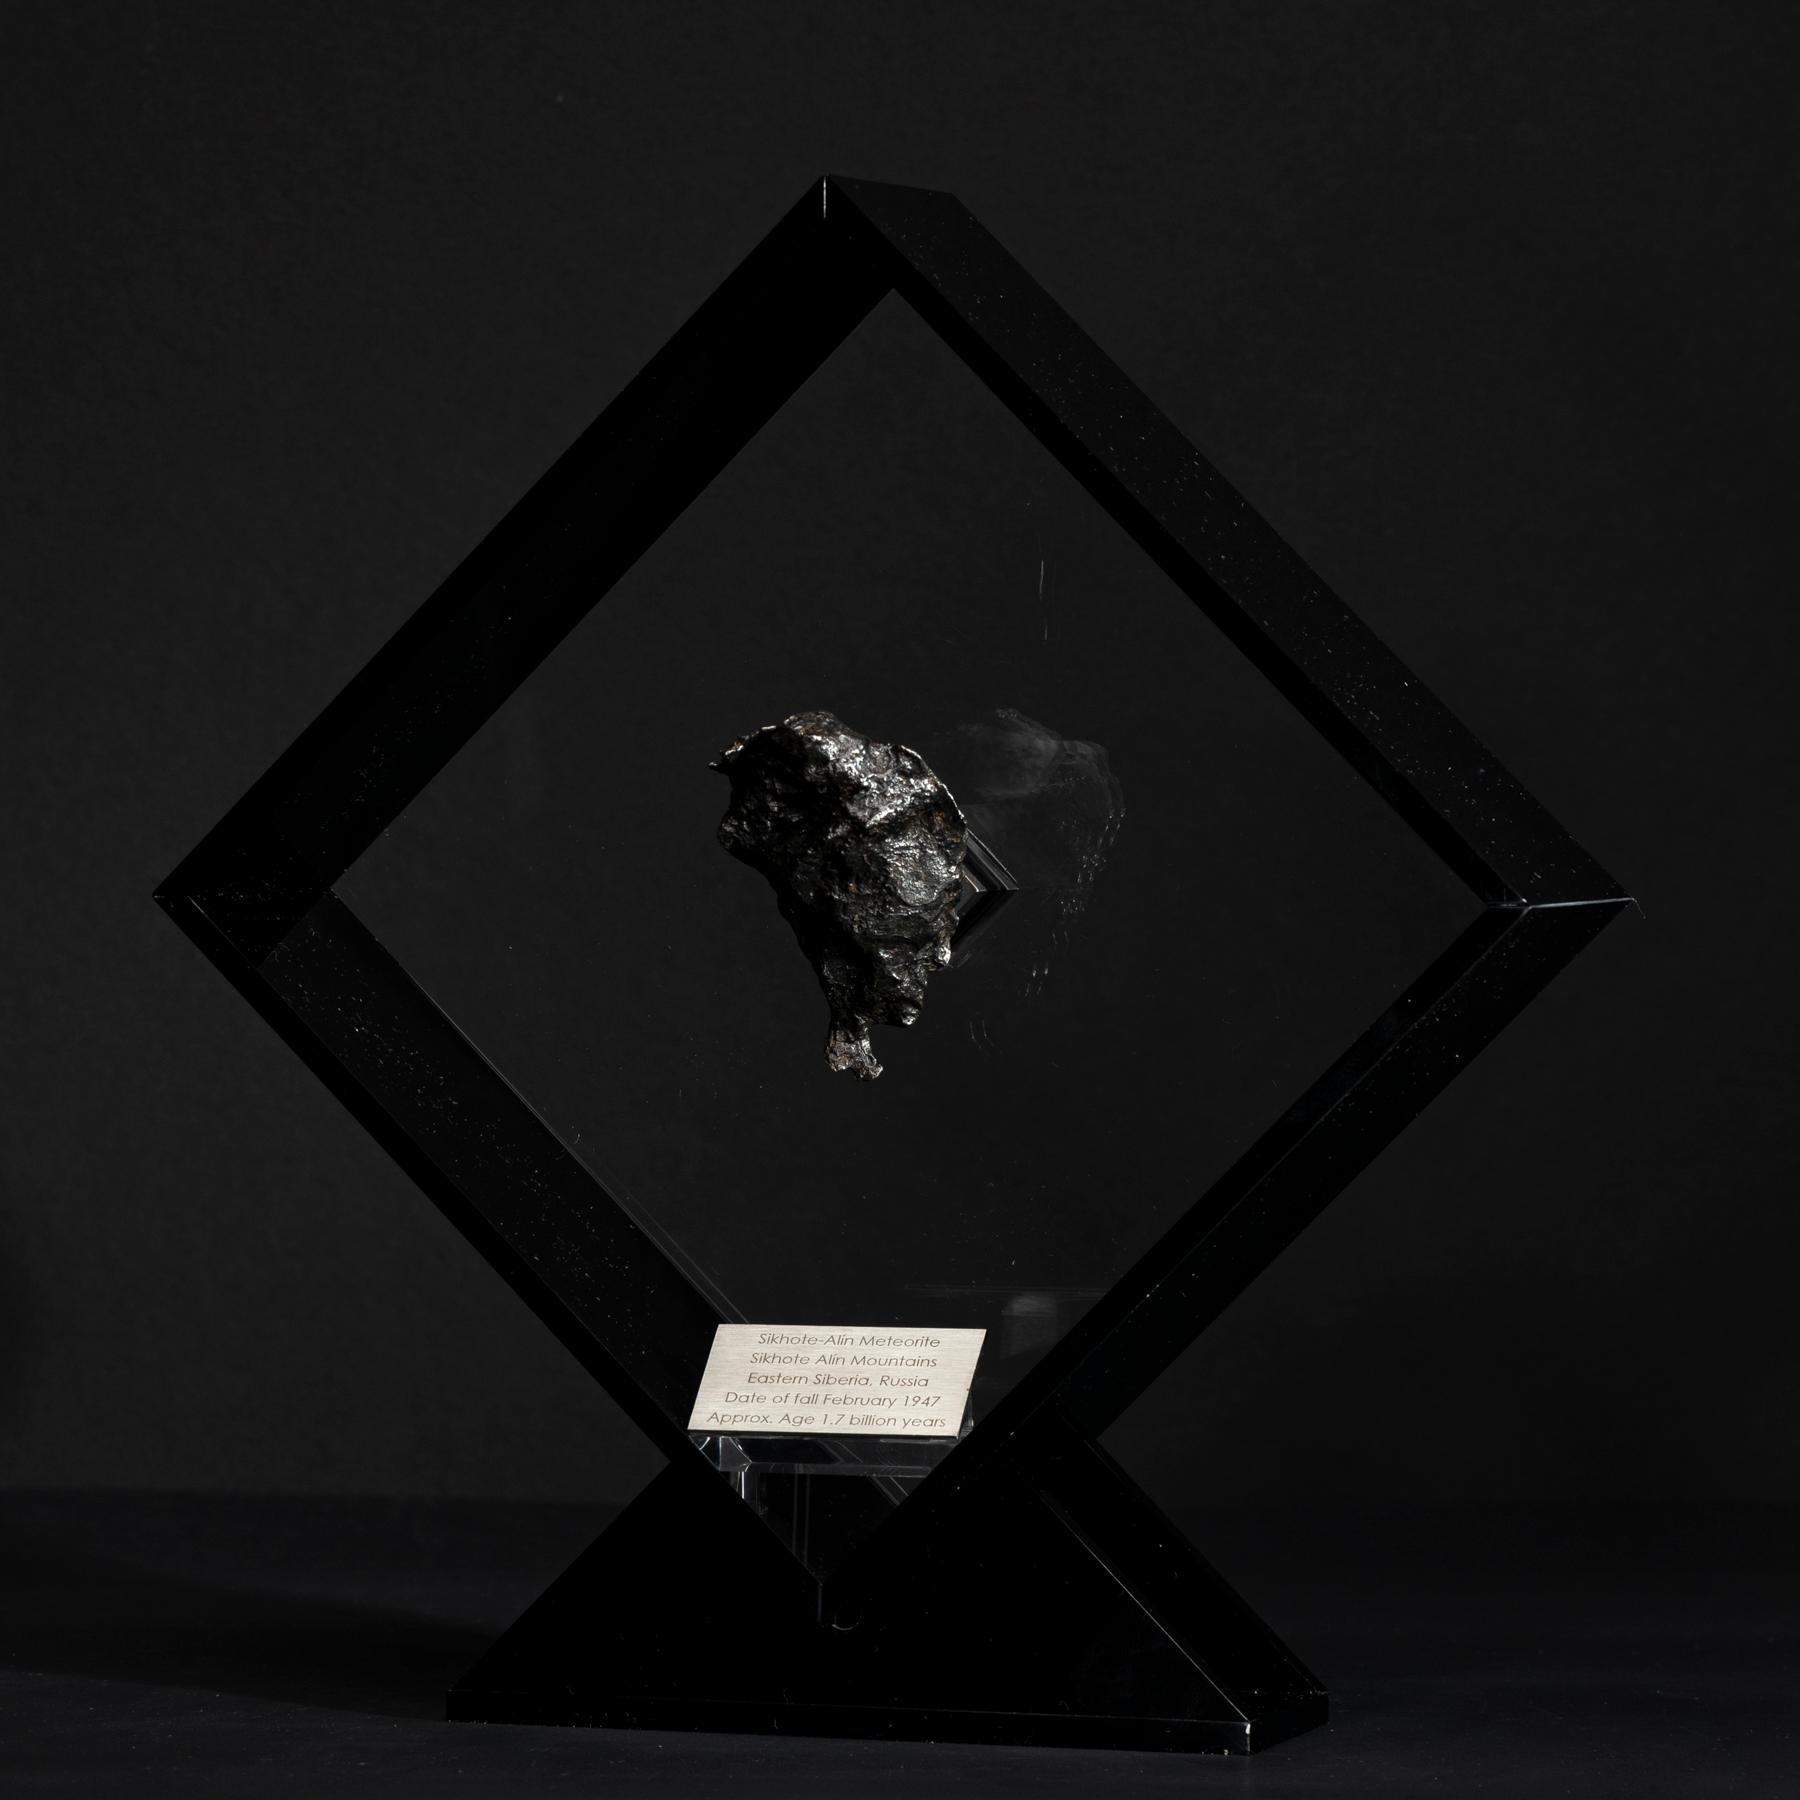 Original design in acrylic display with a magnet making the Meteorite look as it´s floating the same way it did in outer space for years before its final visit to Earth. 

Sikhote Alin Meteorite
This iron Meteorite fell in Eastern Siberia, Russia on